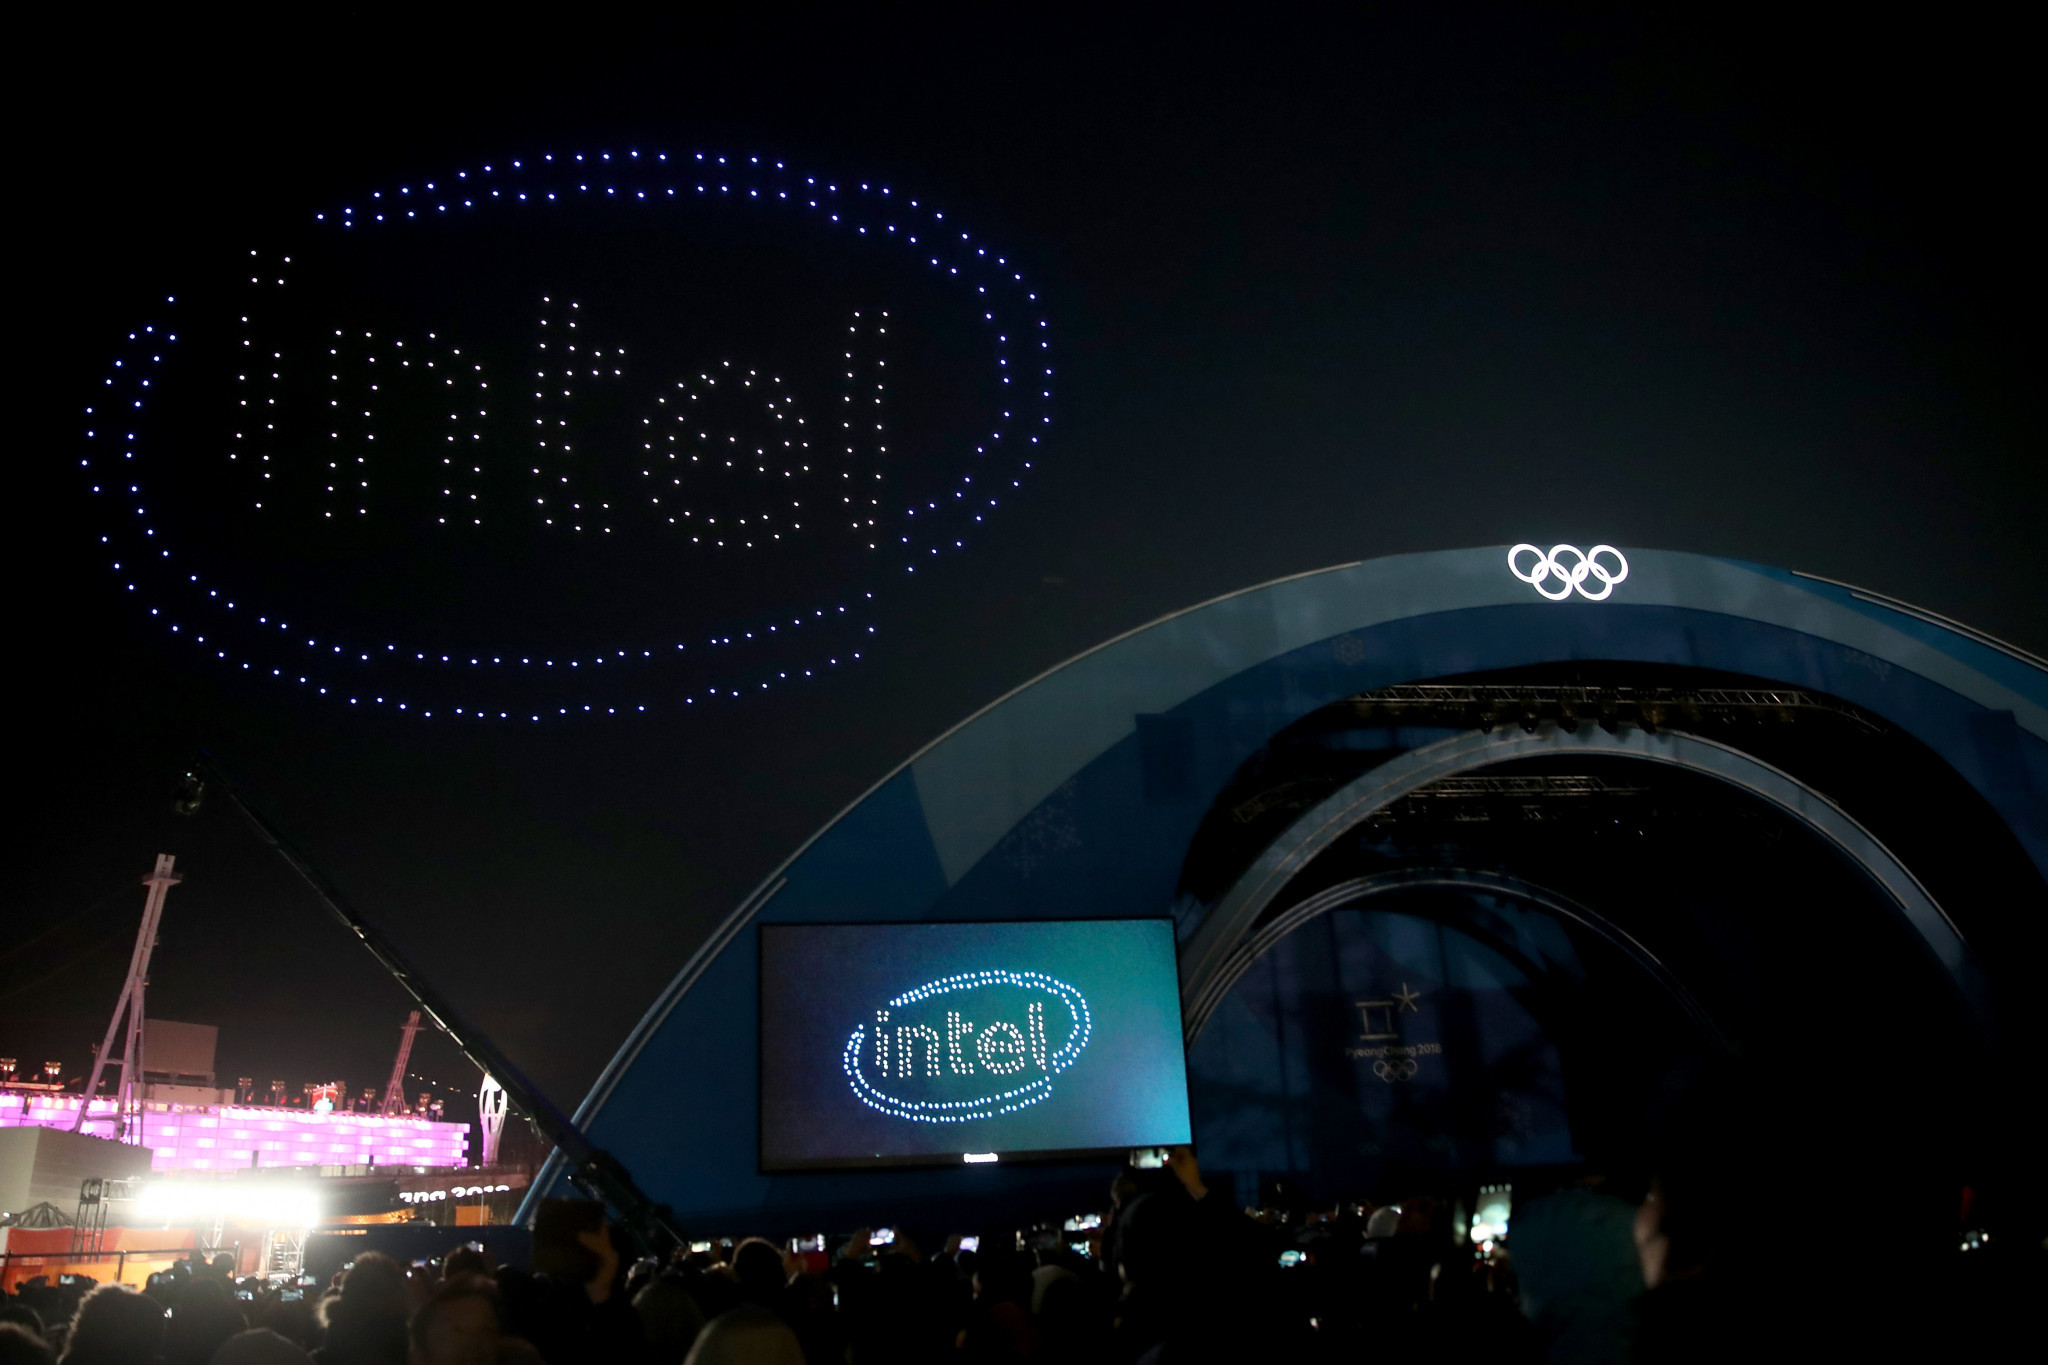 Intel asks for artificial intelligence innovations to enhance Tokyo 2020 experience